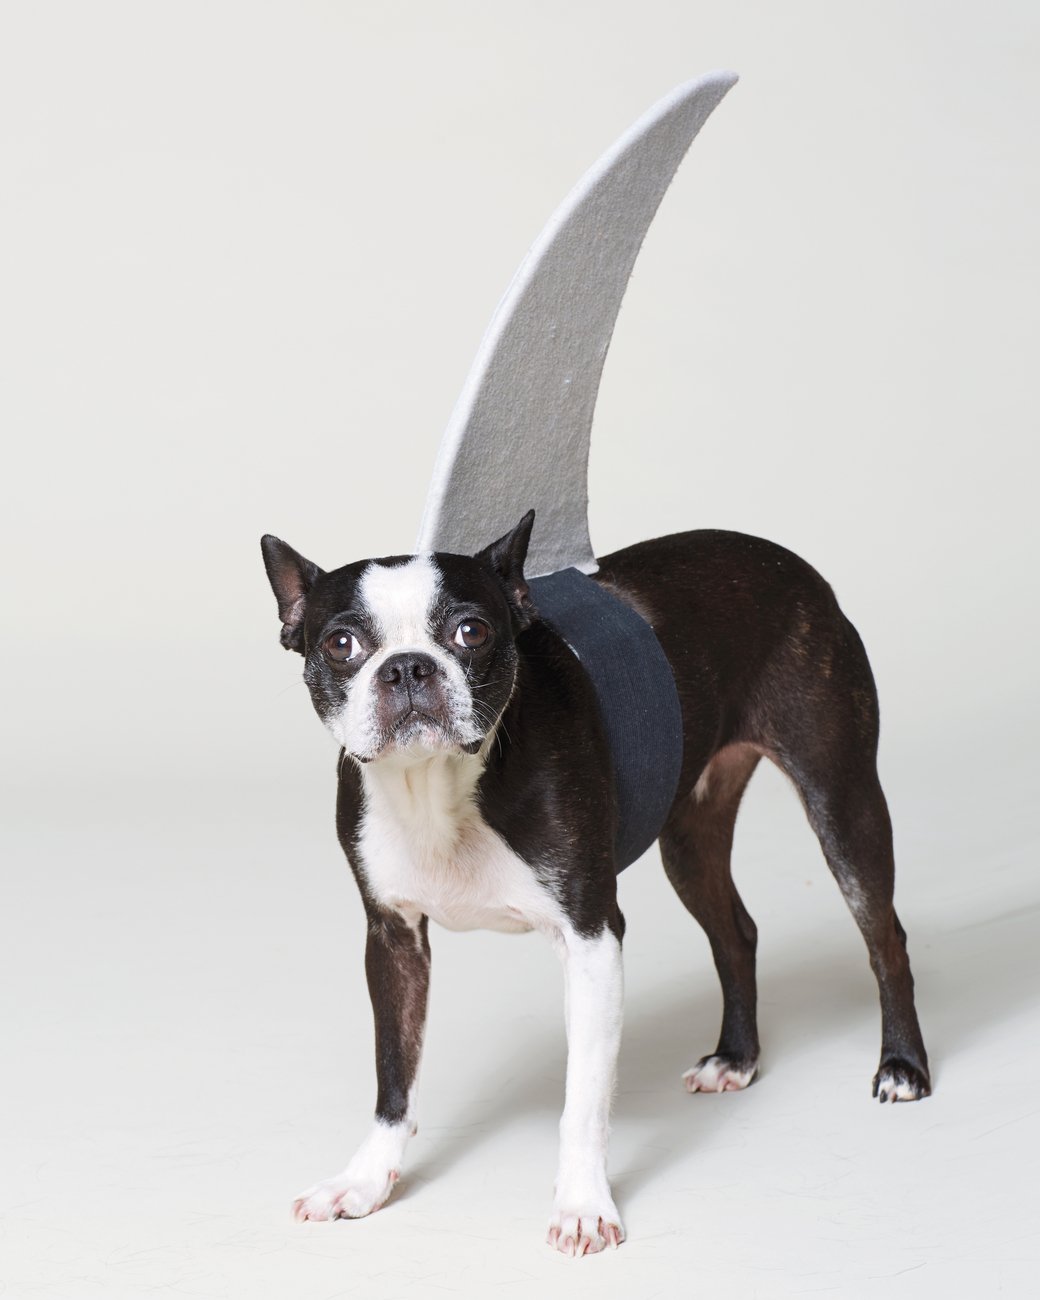 Shark Costume | 25+ Creative Costumes for Dogs